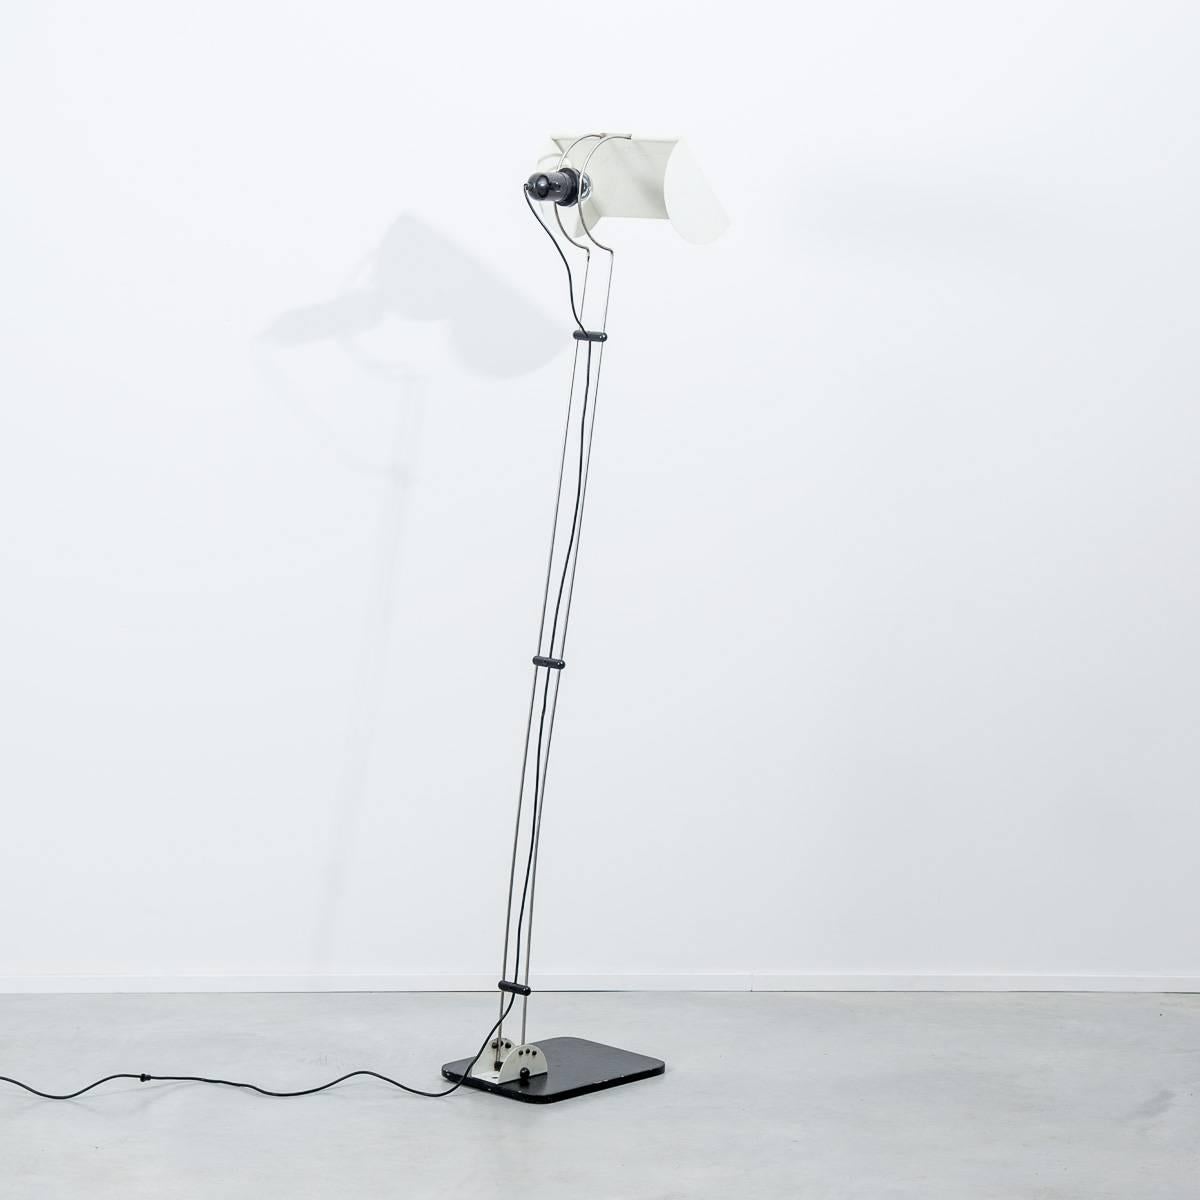 A floor lamp produced in Italy in 1972 by iGuzzini. The weighted metal base supports chrome rods and an adjustable hood. The bakelite adjustable bulb holder which is held between the rods is switched.

High quality construction but of unknown